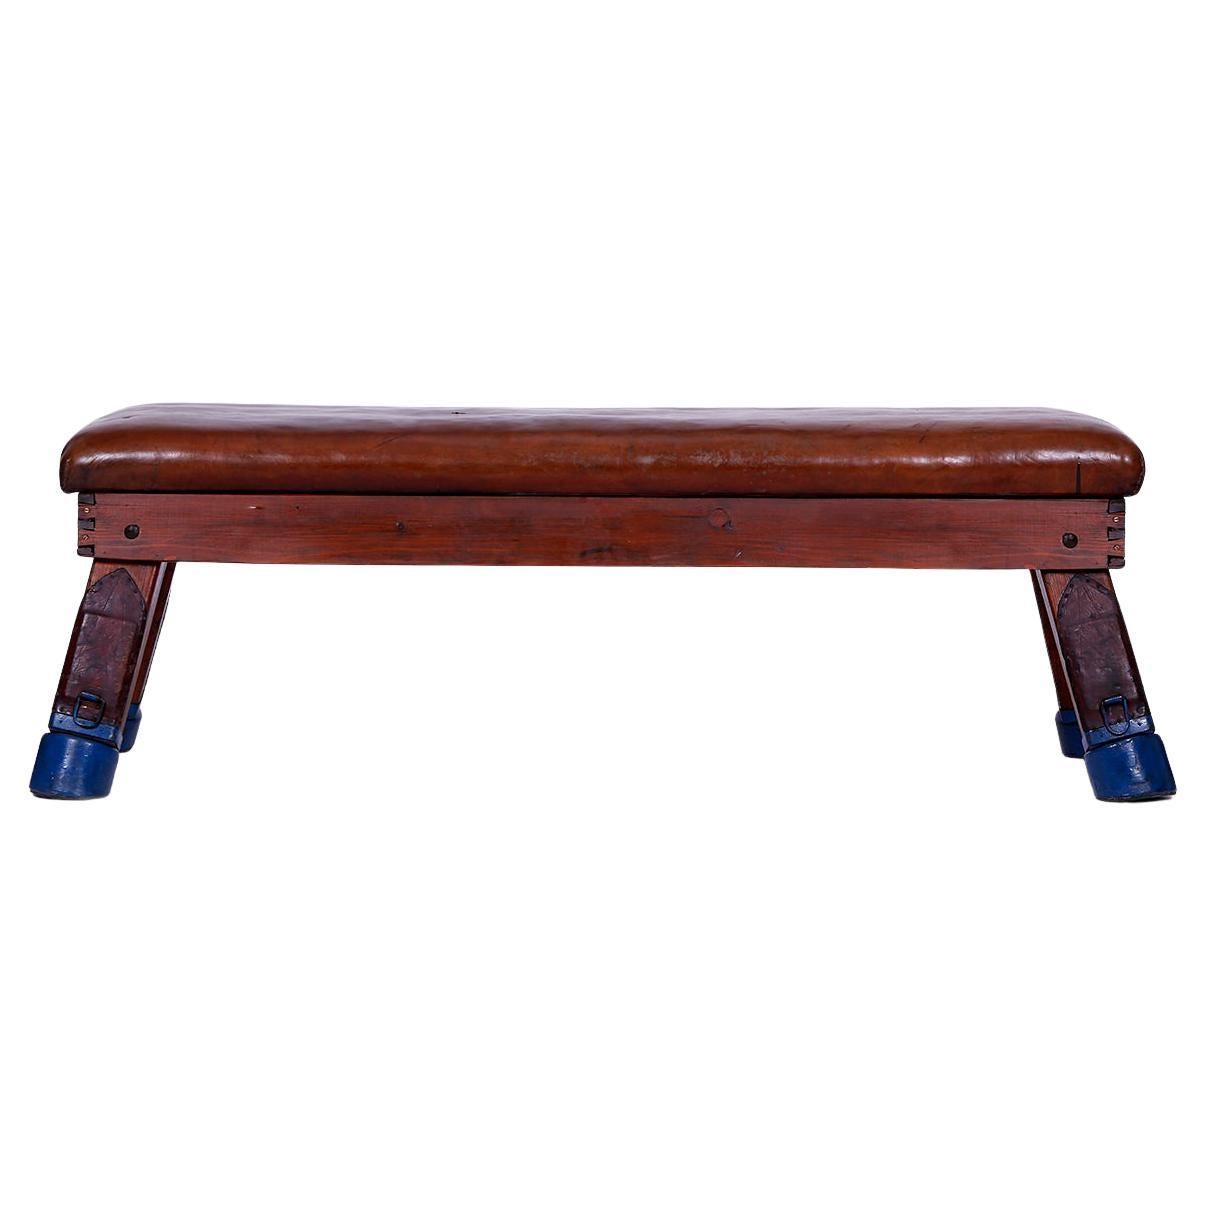 Gymnastic Vintage Leather Pommel Horse Gym Bench TOP Extra Long, 1930s